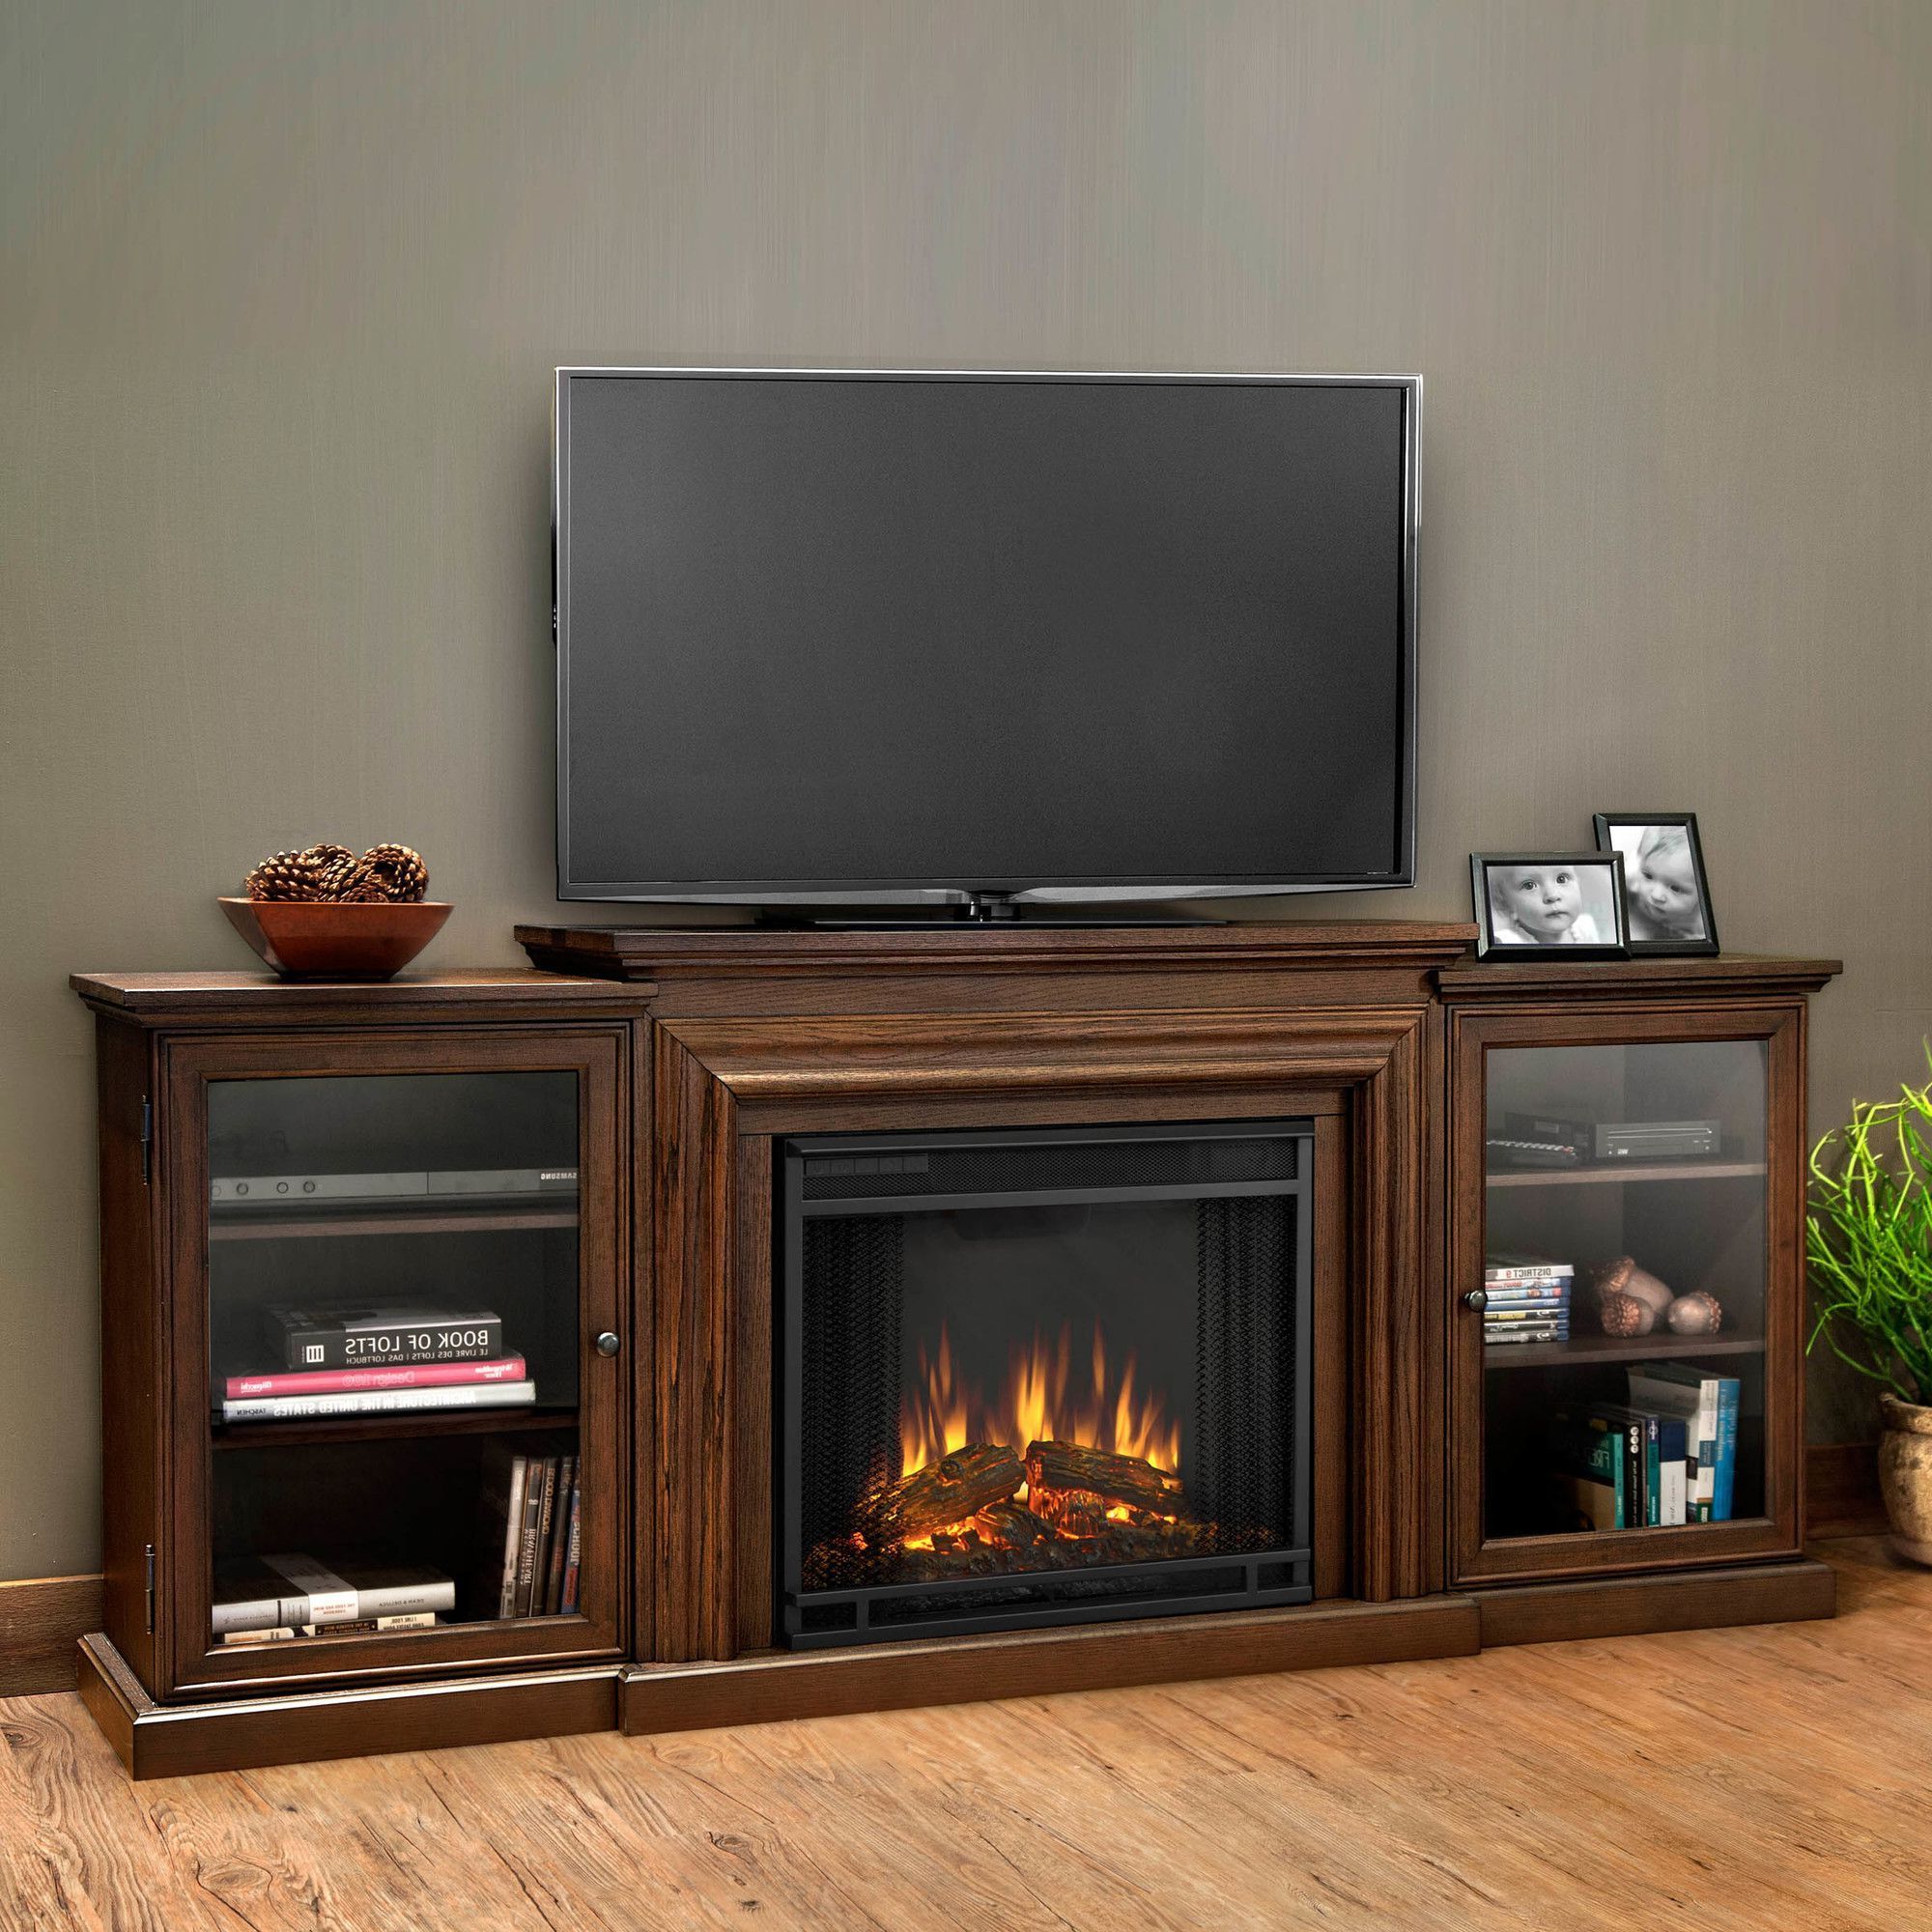 Frederick Tv Stand For Tvs Up To 78" With Fireplace For Neilsen Tv Stands For Tvs Up To 50" With Fireplace Included (Gallery 20 of 20)